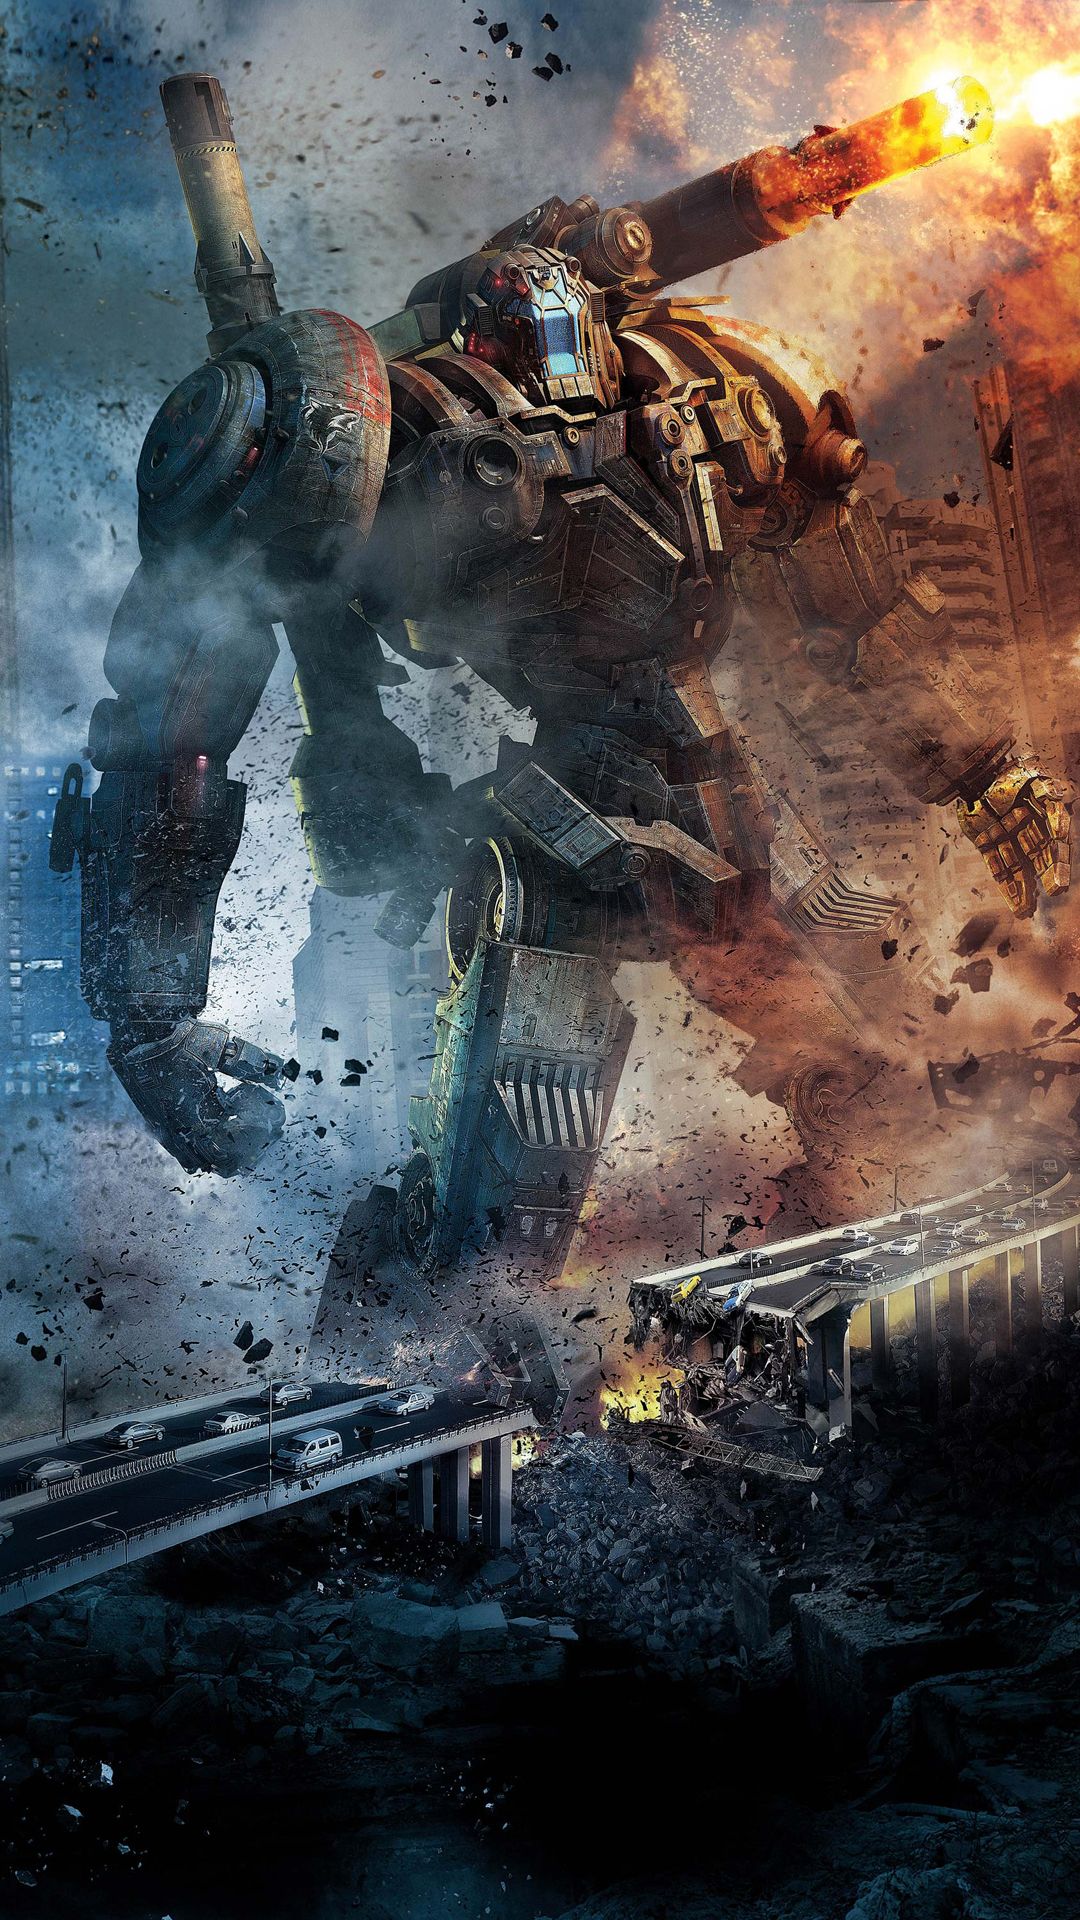 Pacific Rim htc one Best htc one wallpaper, free and easy to download